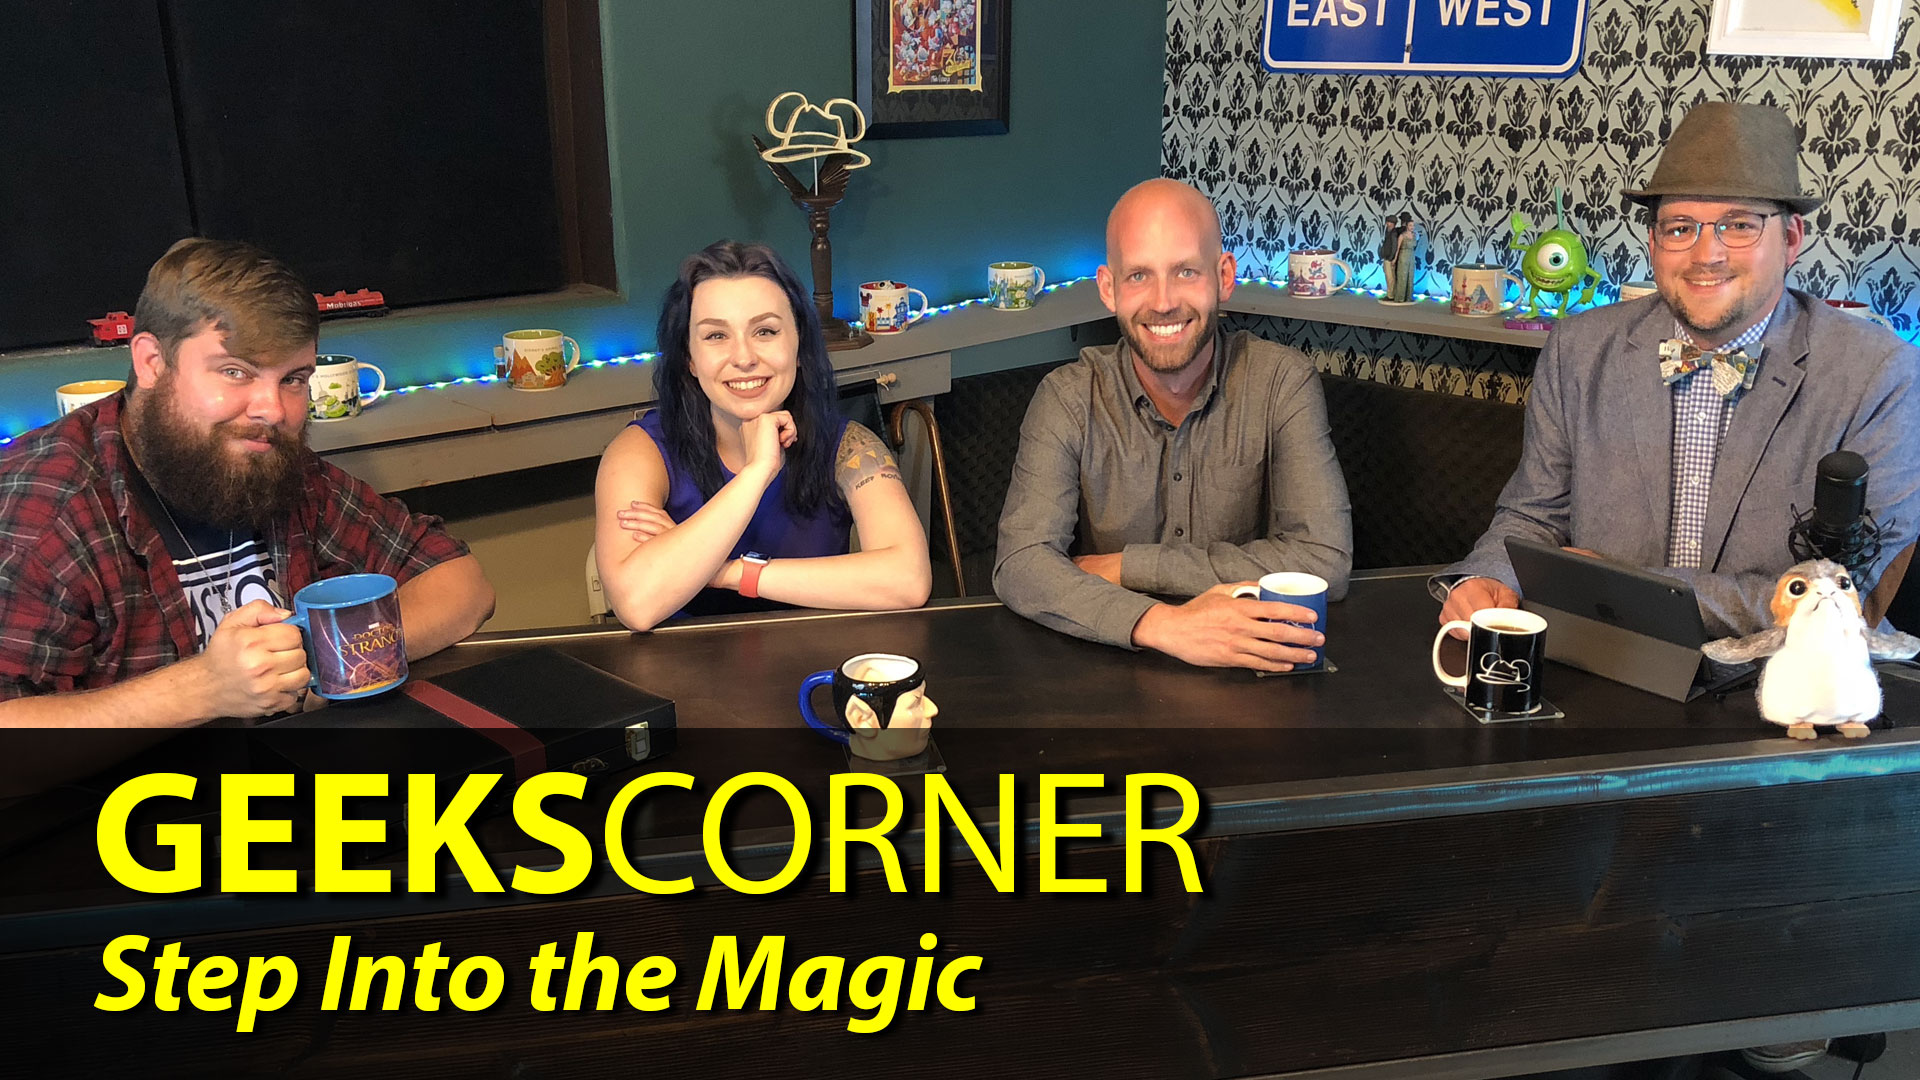 Step Into the Magic – GEEKS CORNER (With Special Guest Bret Iwan) – Episode 830